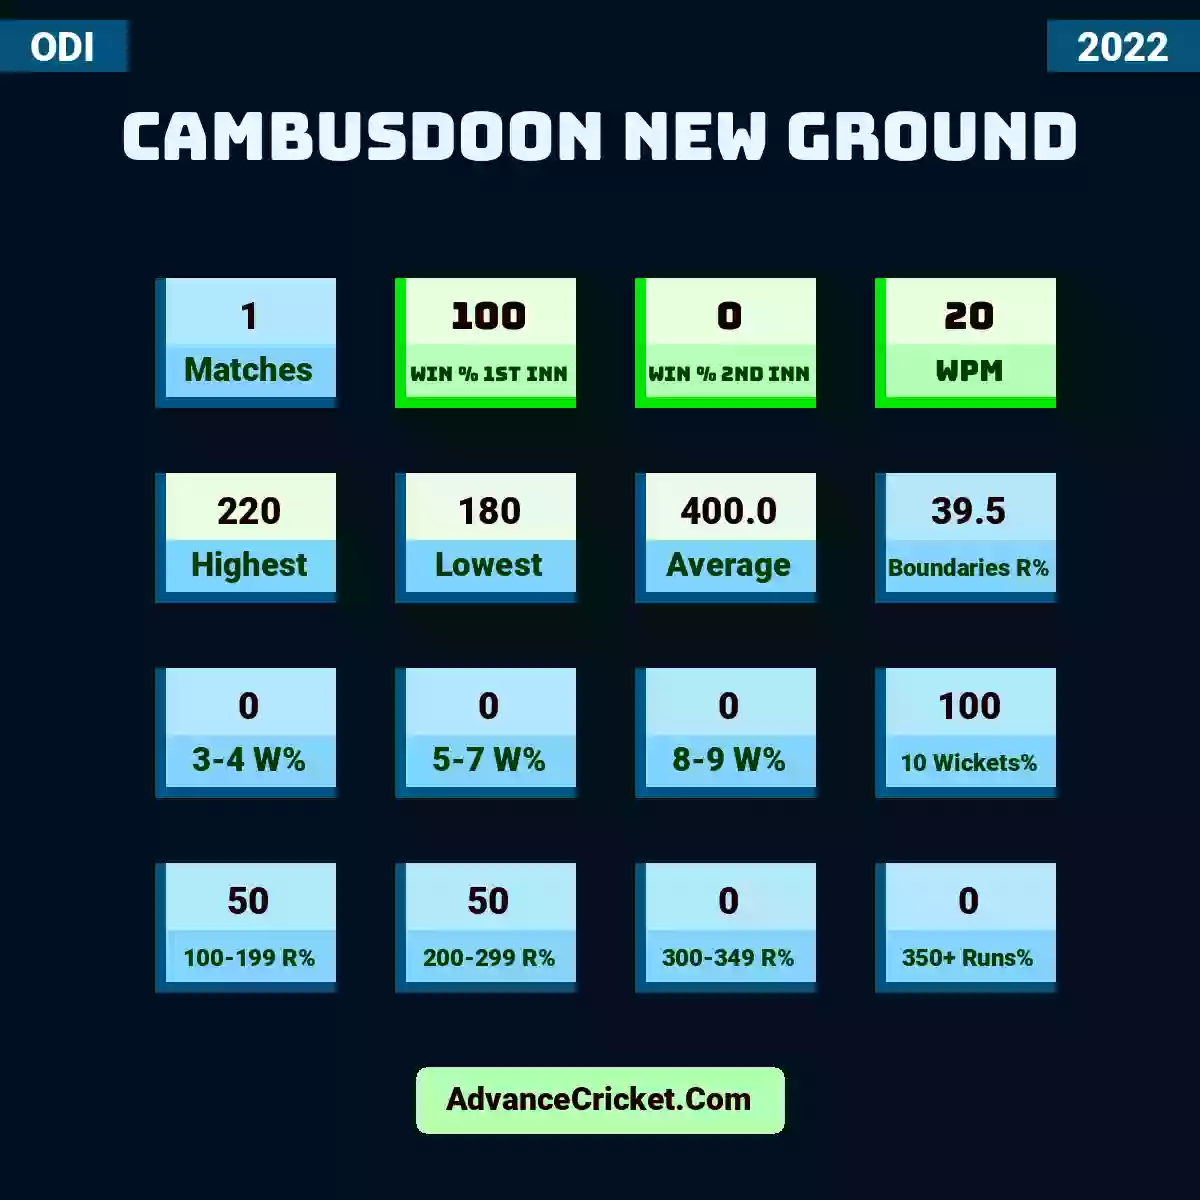 Image showing Cambusdoon New Ground with Matches: 1, Win % 1st Inn: 100, Win % 2nd Inn: 0, WPM: 20, Highest: 220, Lowest: 180, Average: 400.0, Boundaries R%: 39.5, 3-4 W%: 0, 5-7 W%: 0, 8-9 W%: 0, 10 Wickets%: 100, 100-199 R%: 50, 200-299 R%: 50, 300-349 R%: 0, 350+ Runs%: 0.